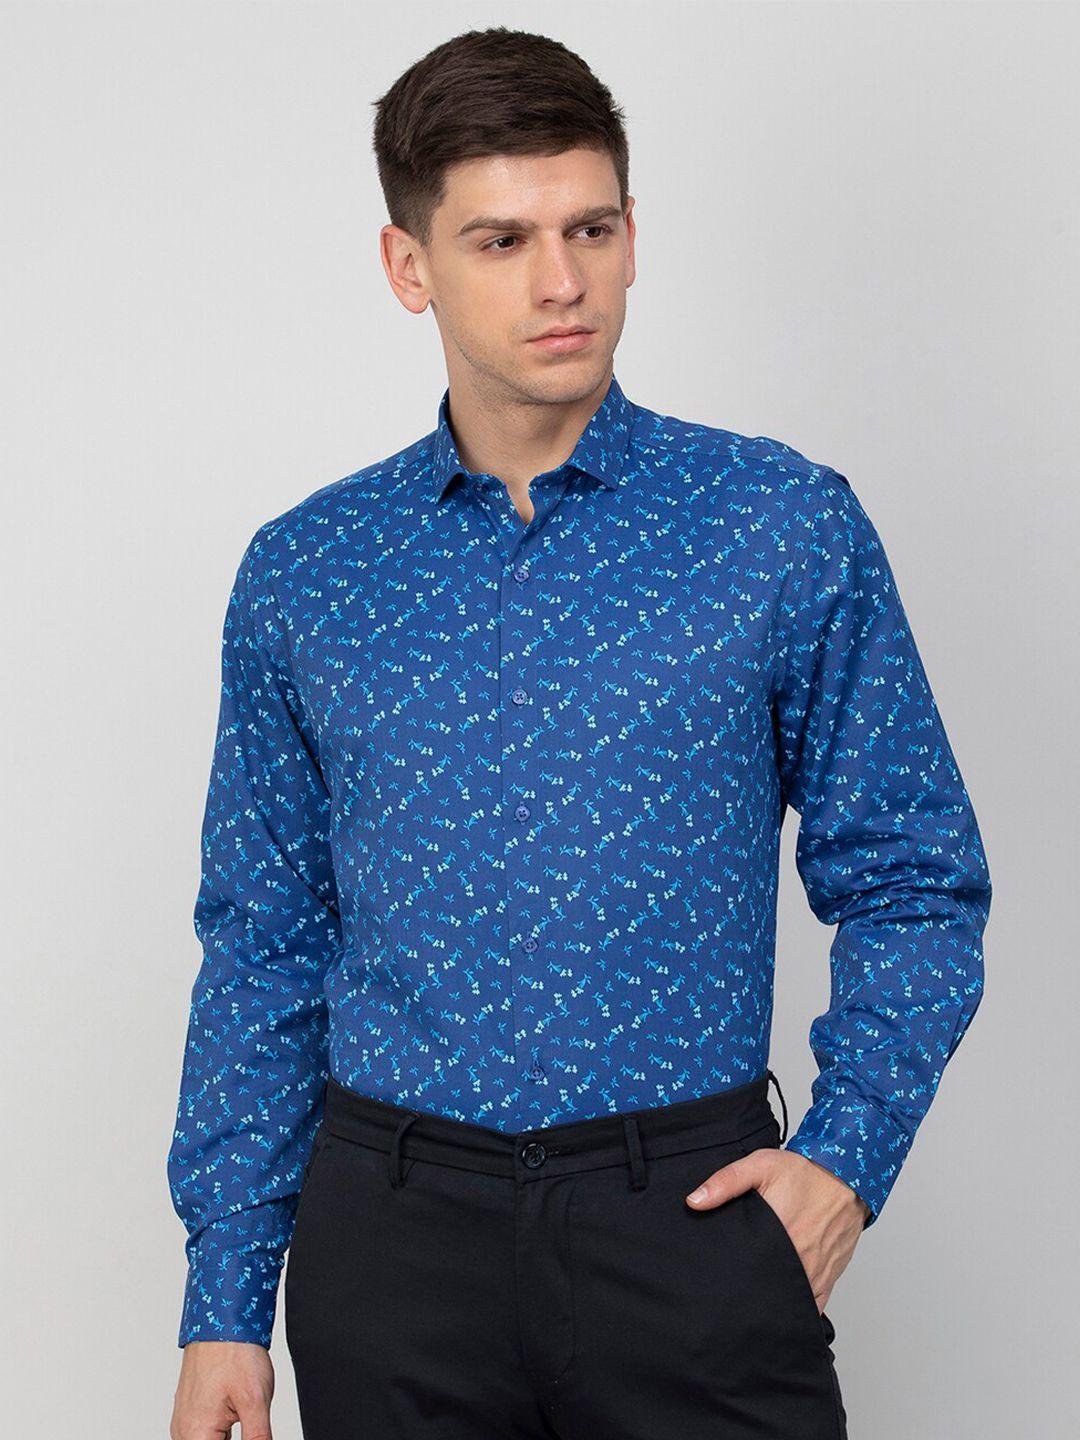 code by lifestyle floral printed cotton regular fit long sleeves formal shirt